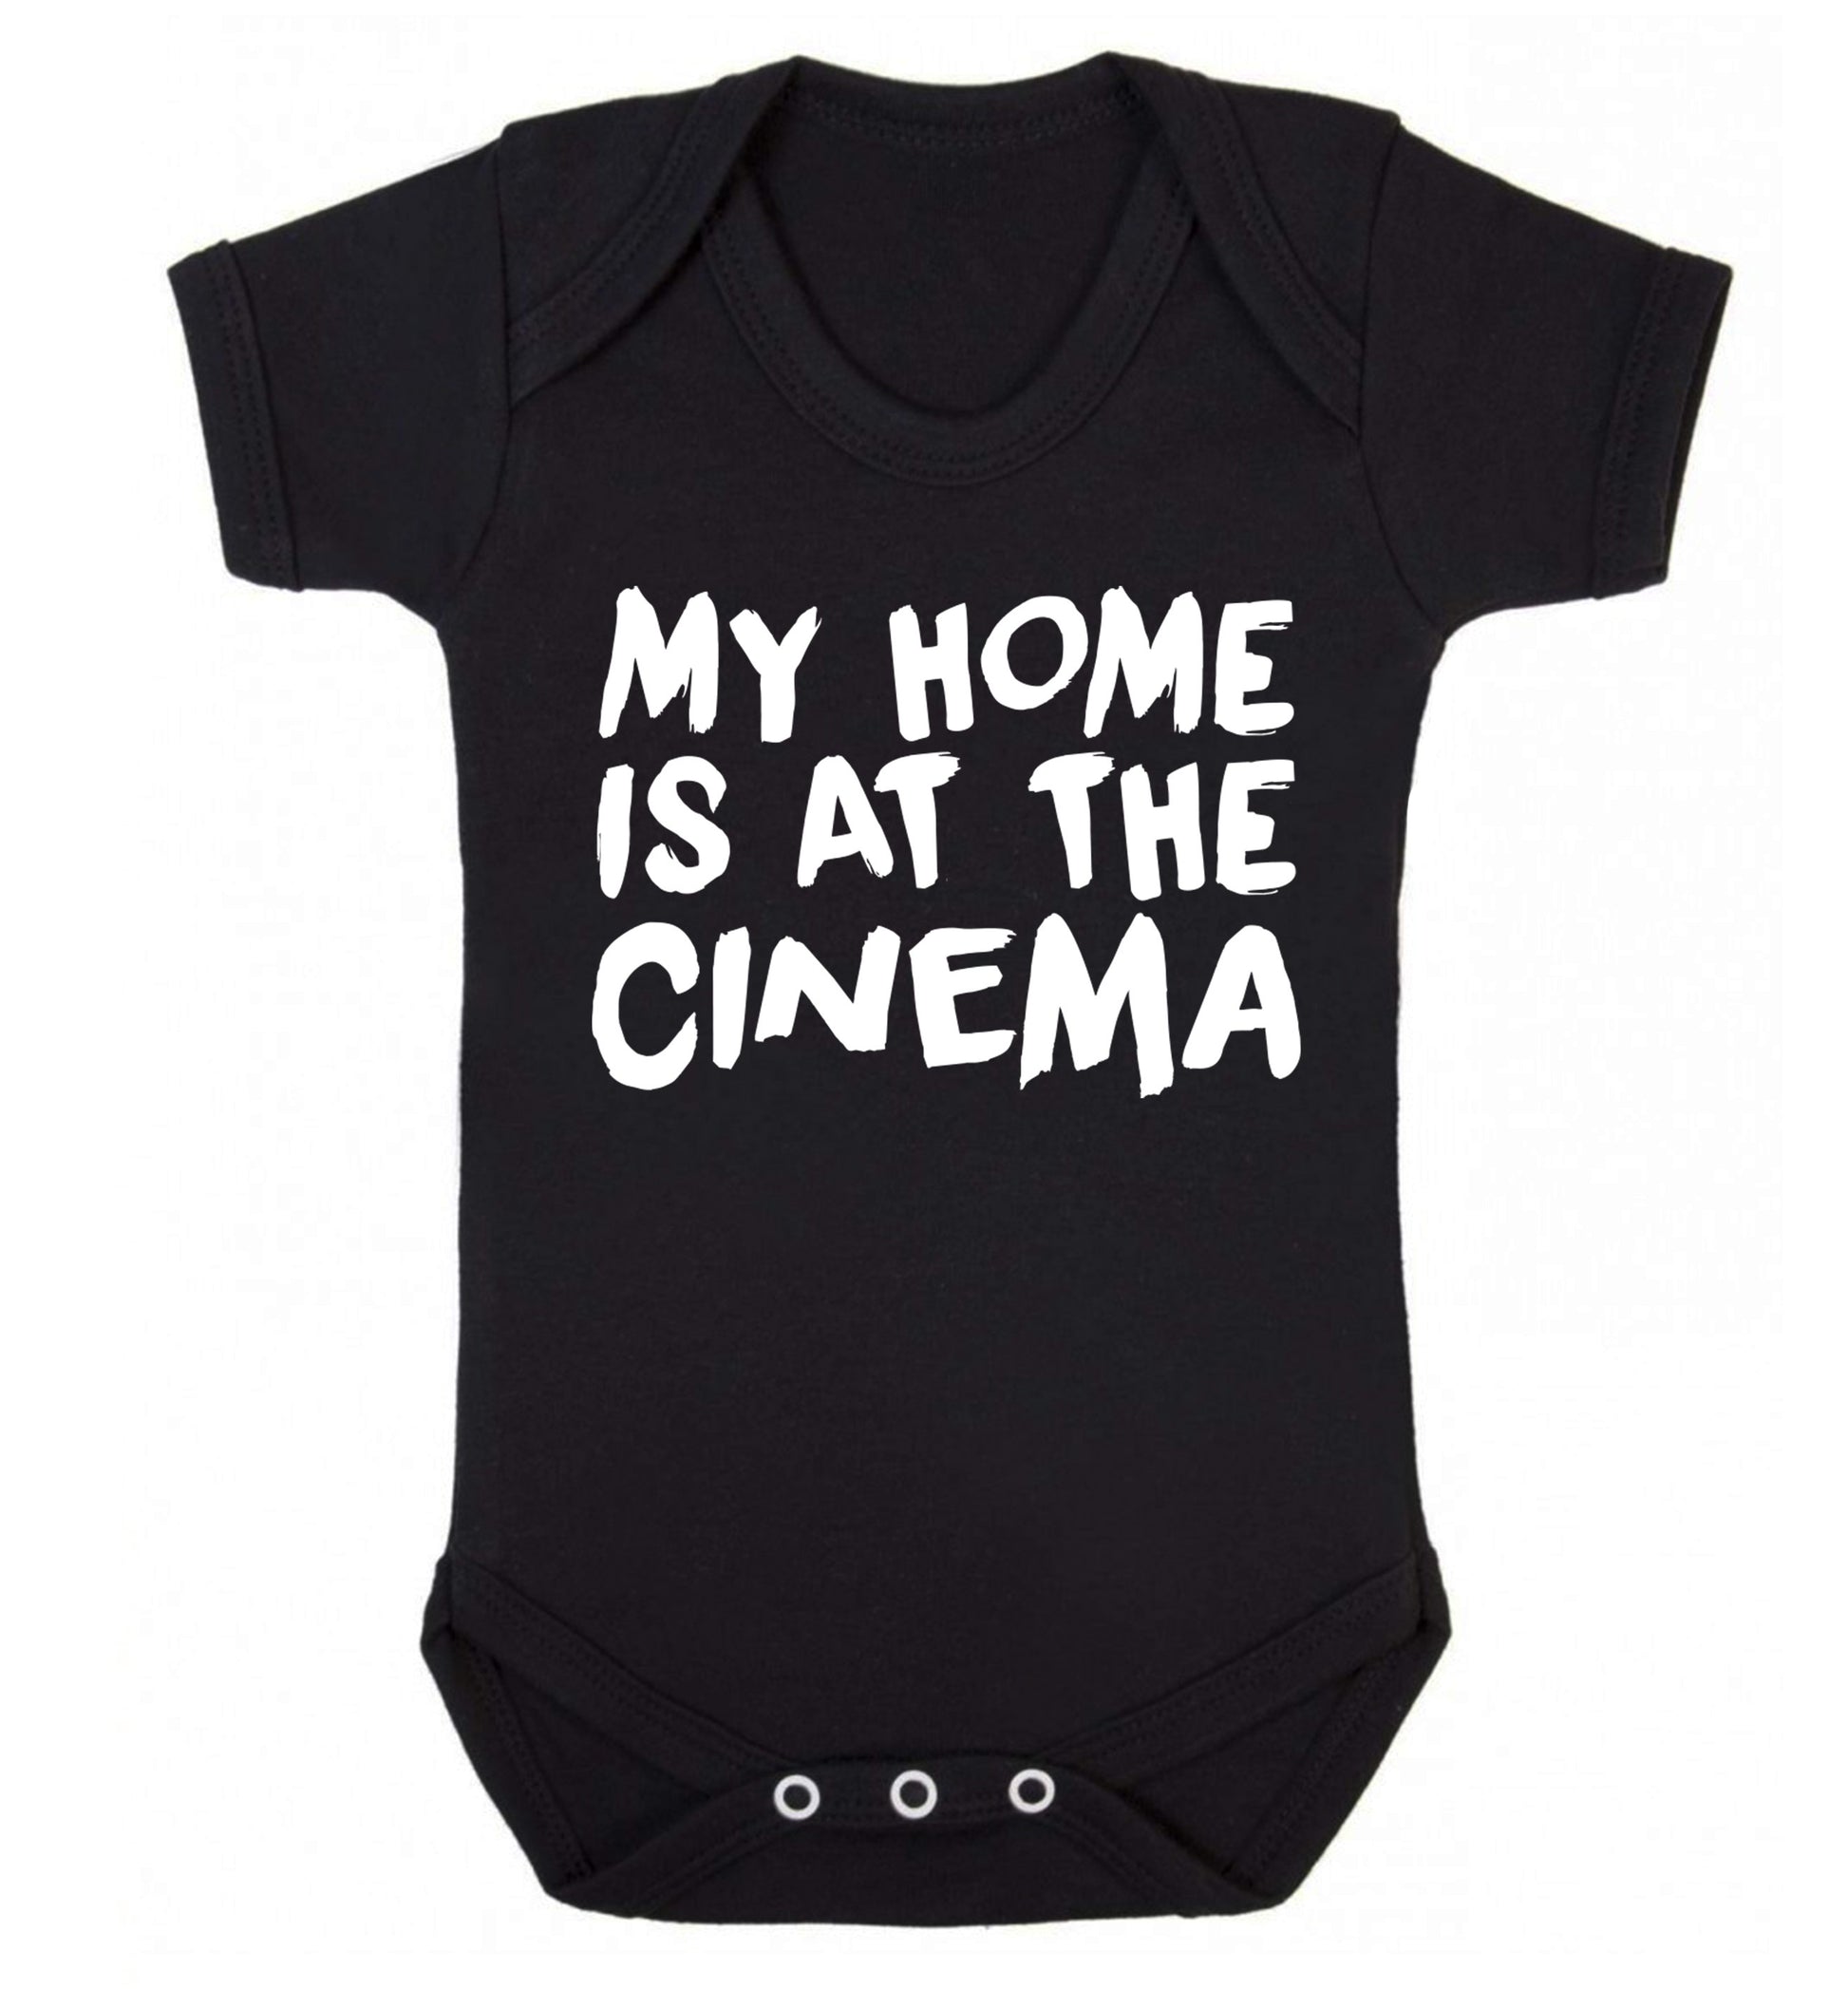 My home is at the cinema Baby Vest black 18-24 months